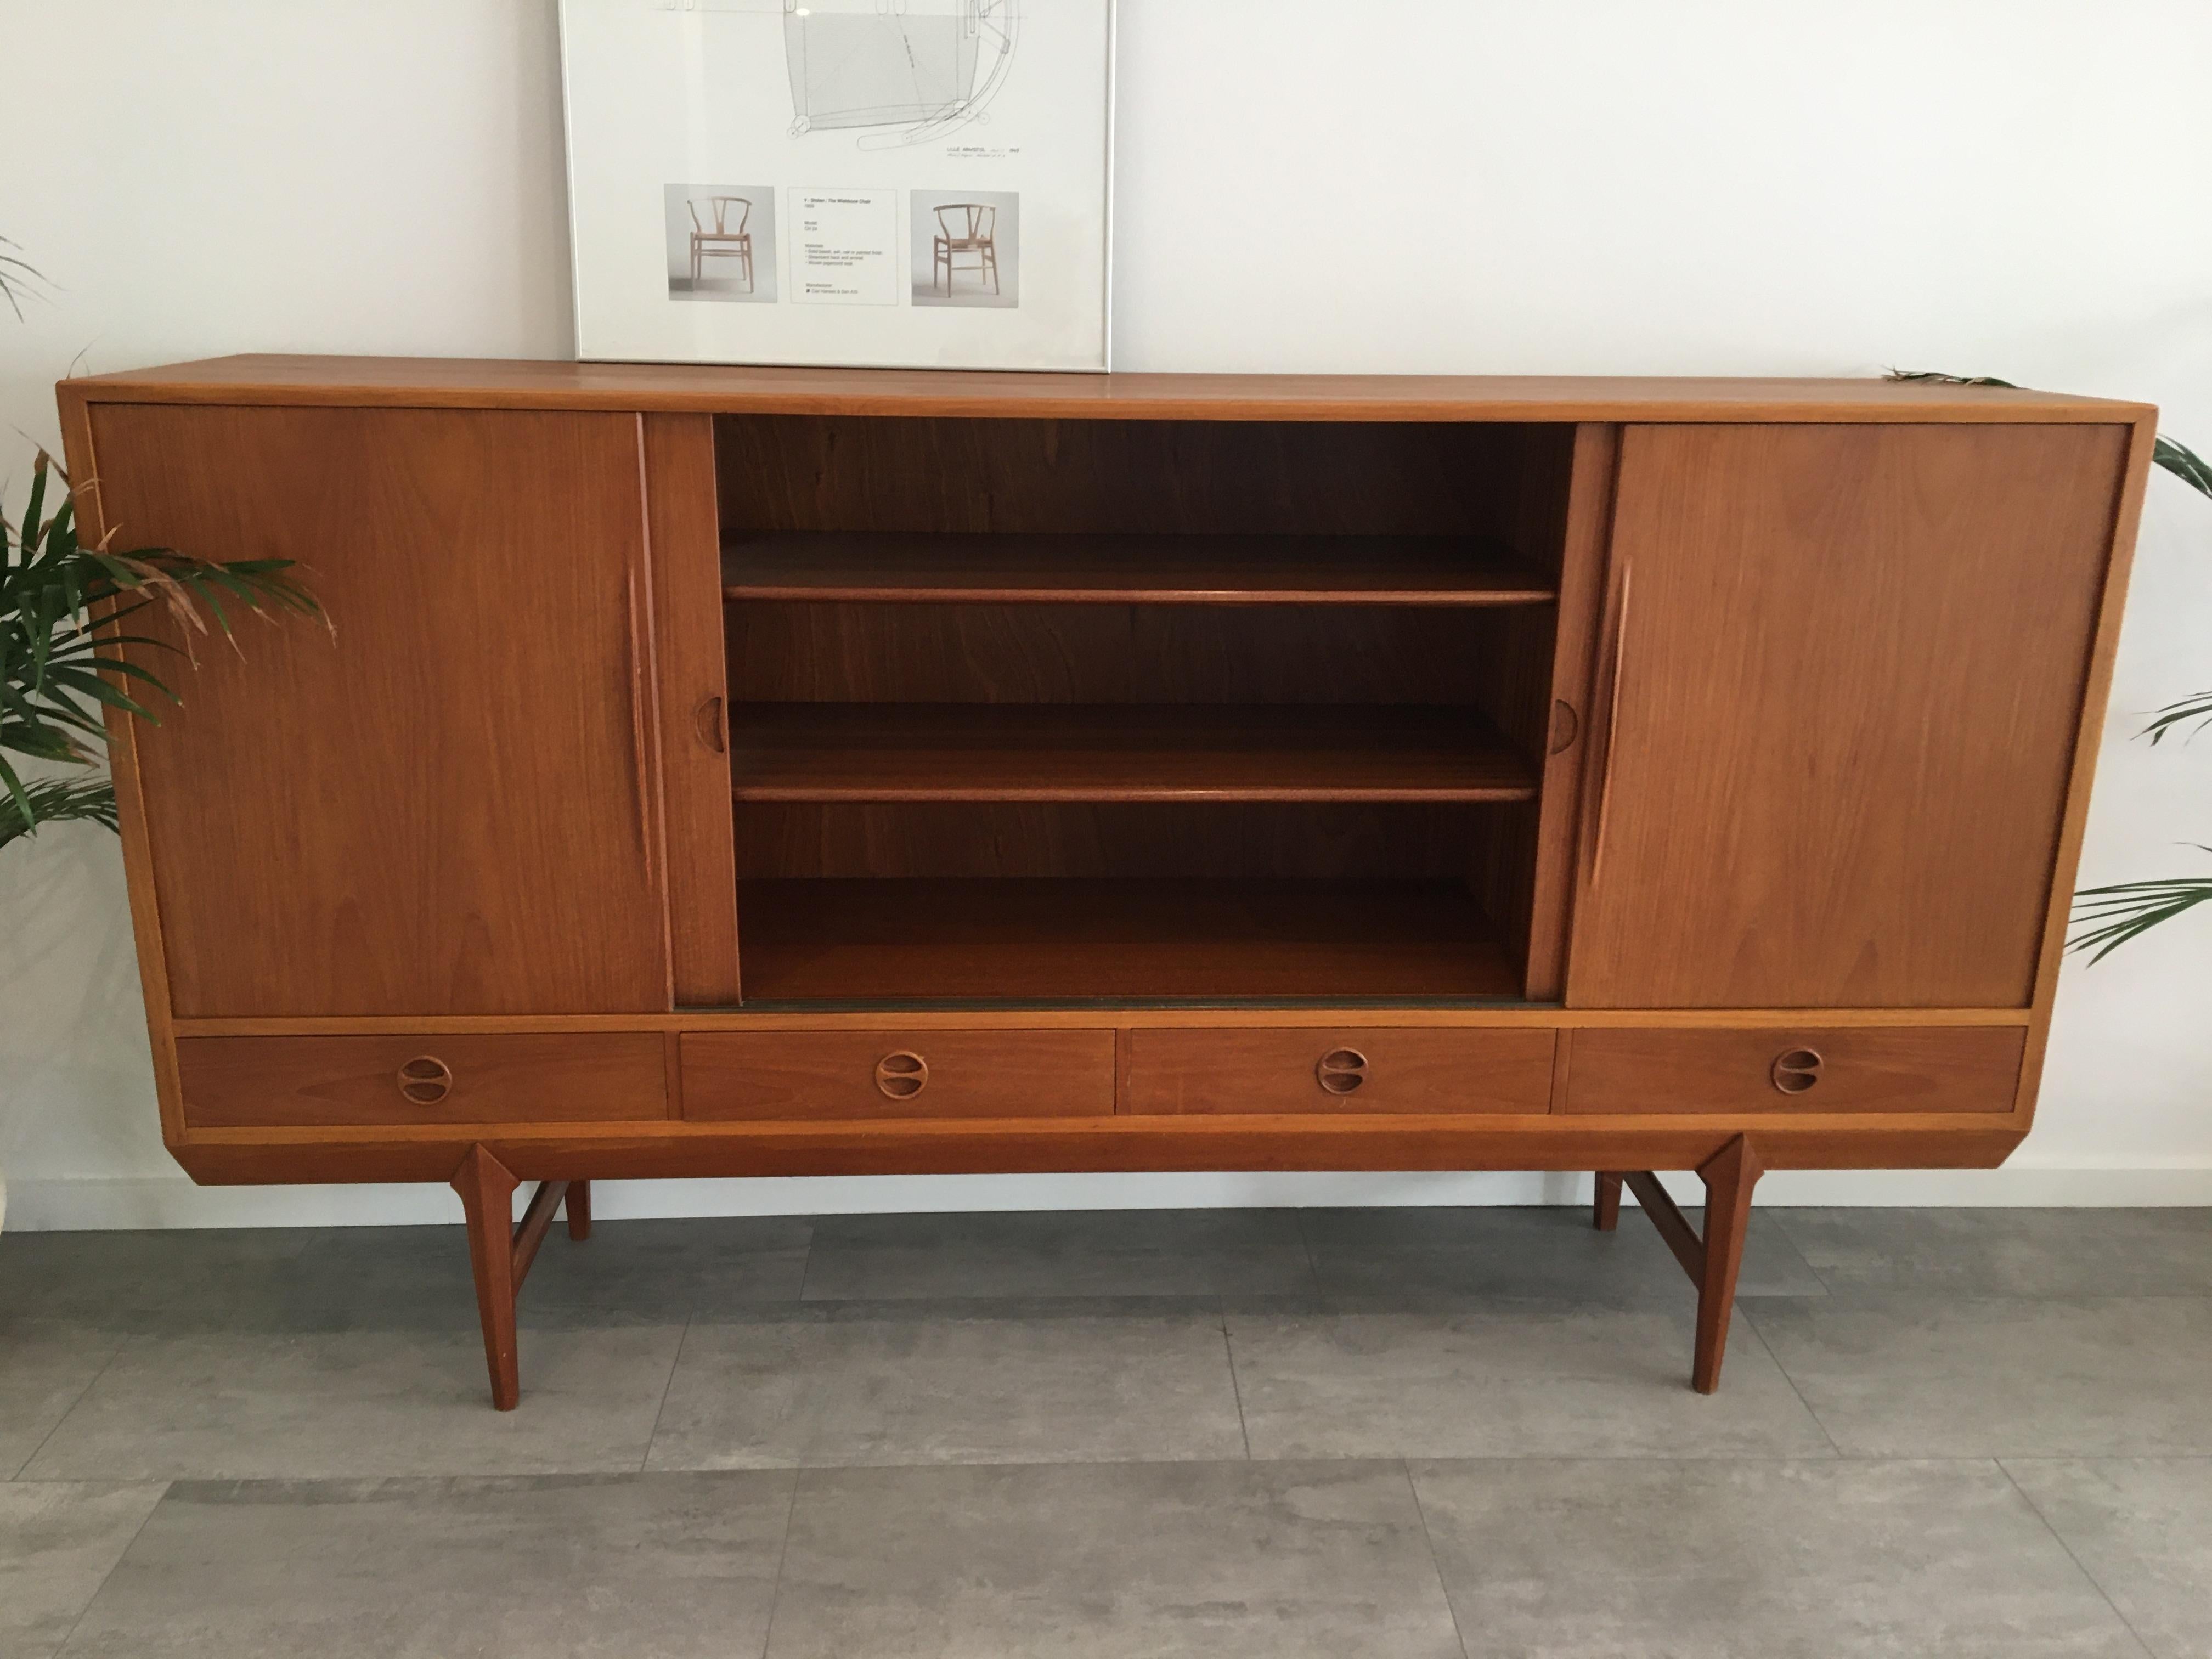 Beautiful Danish teak sideboard with 4 doors, as well as 4 drawers with fine 2-finger handles.
The sideboard contains a shelf on the left and 2 shelves in the middle - on the right a shelf if necessary. For bar and 3 tapered drawers.
Dimensions: H